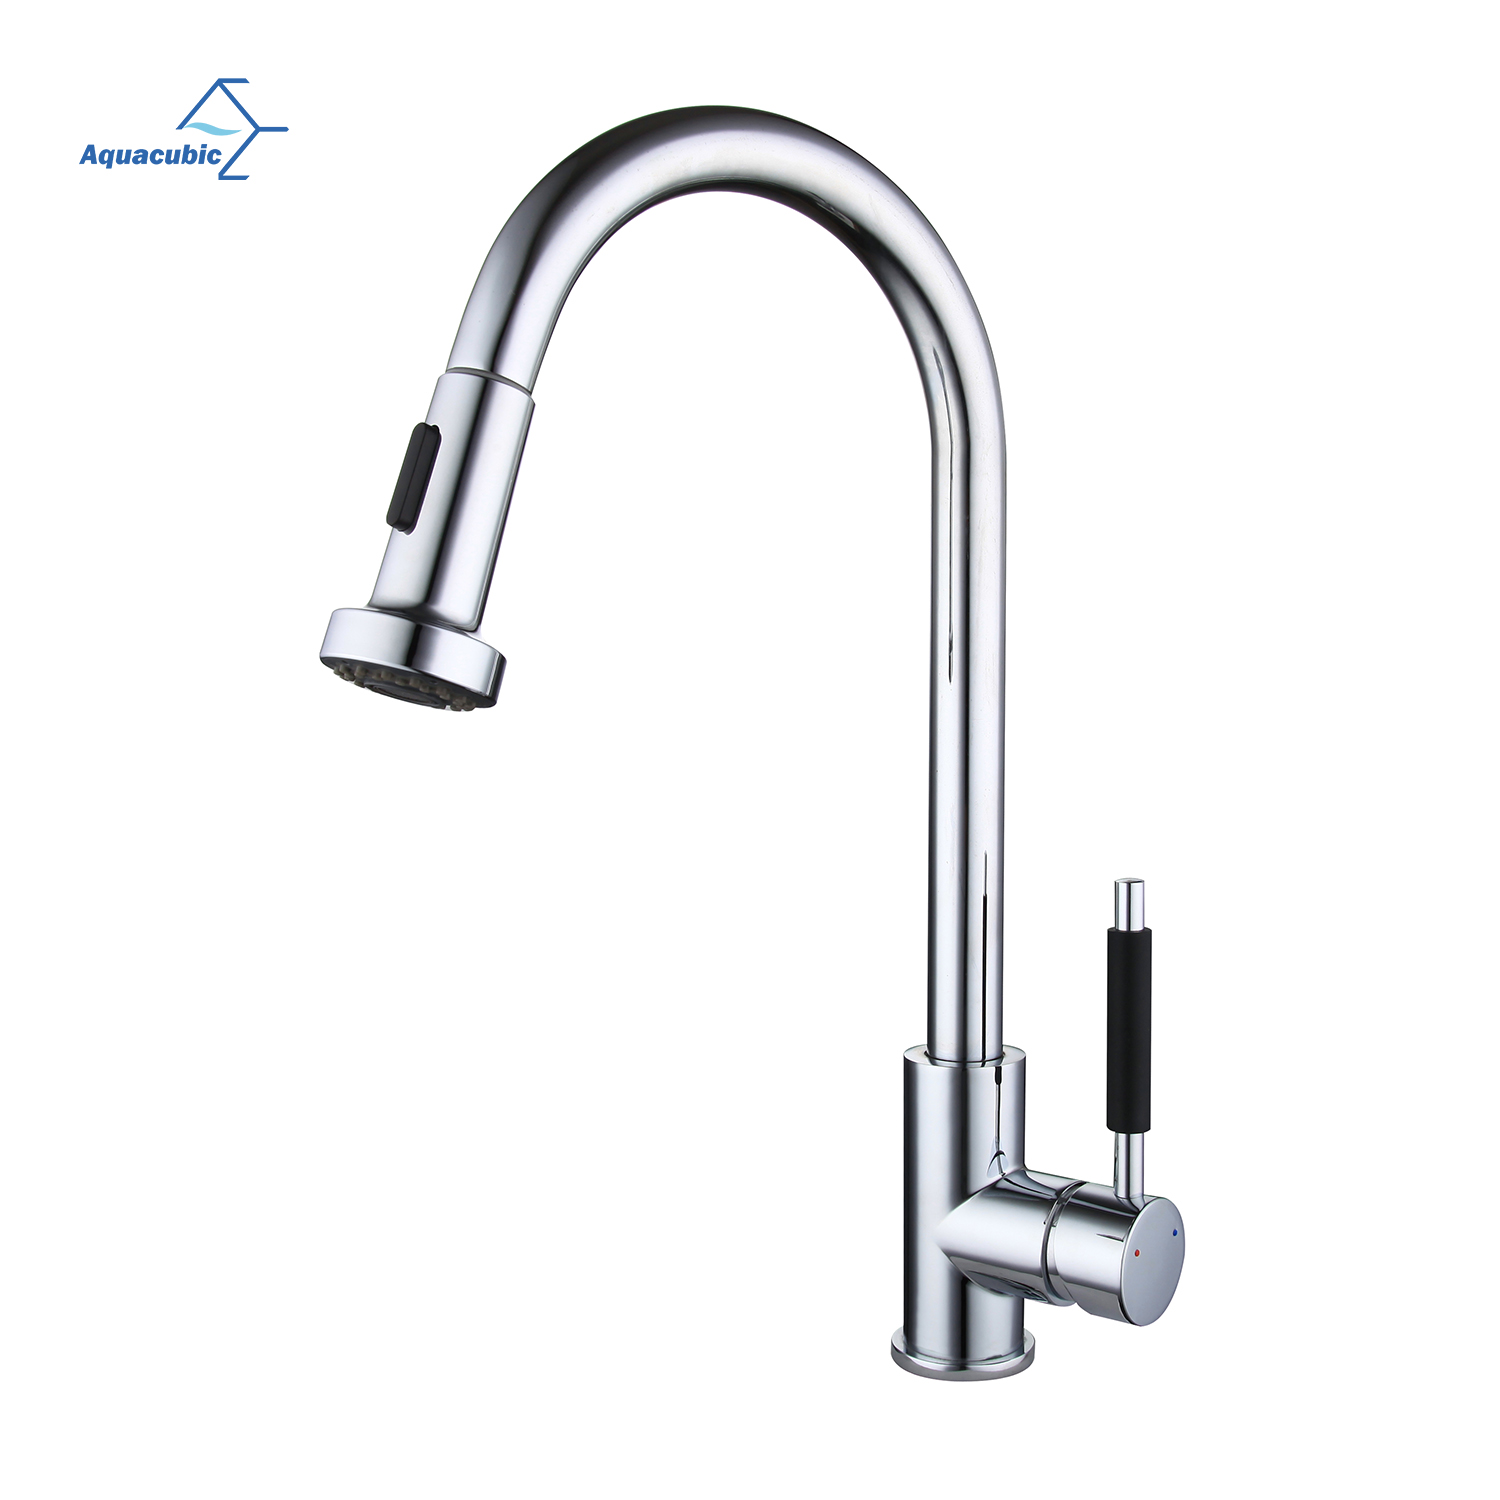 Aquacubic cUPC CEC 304 Stainless Steel Flexible Hose Pull Down Kitchen Faucets 